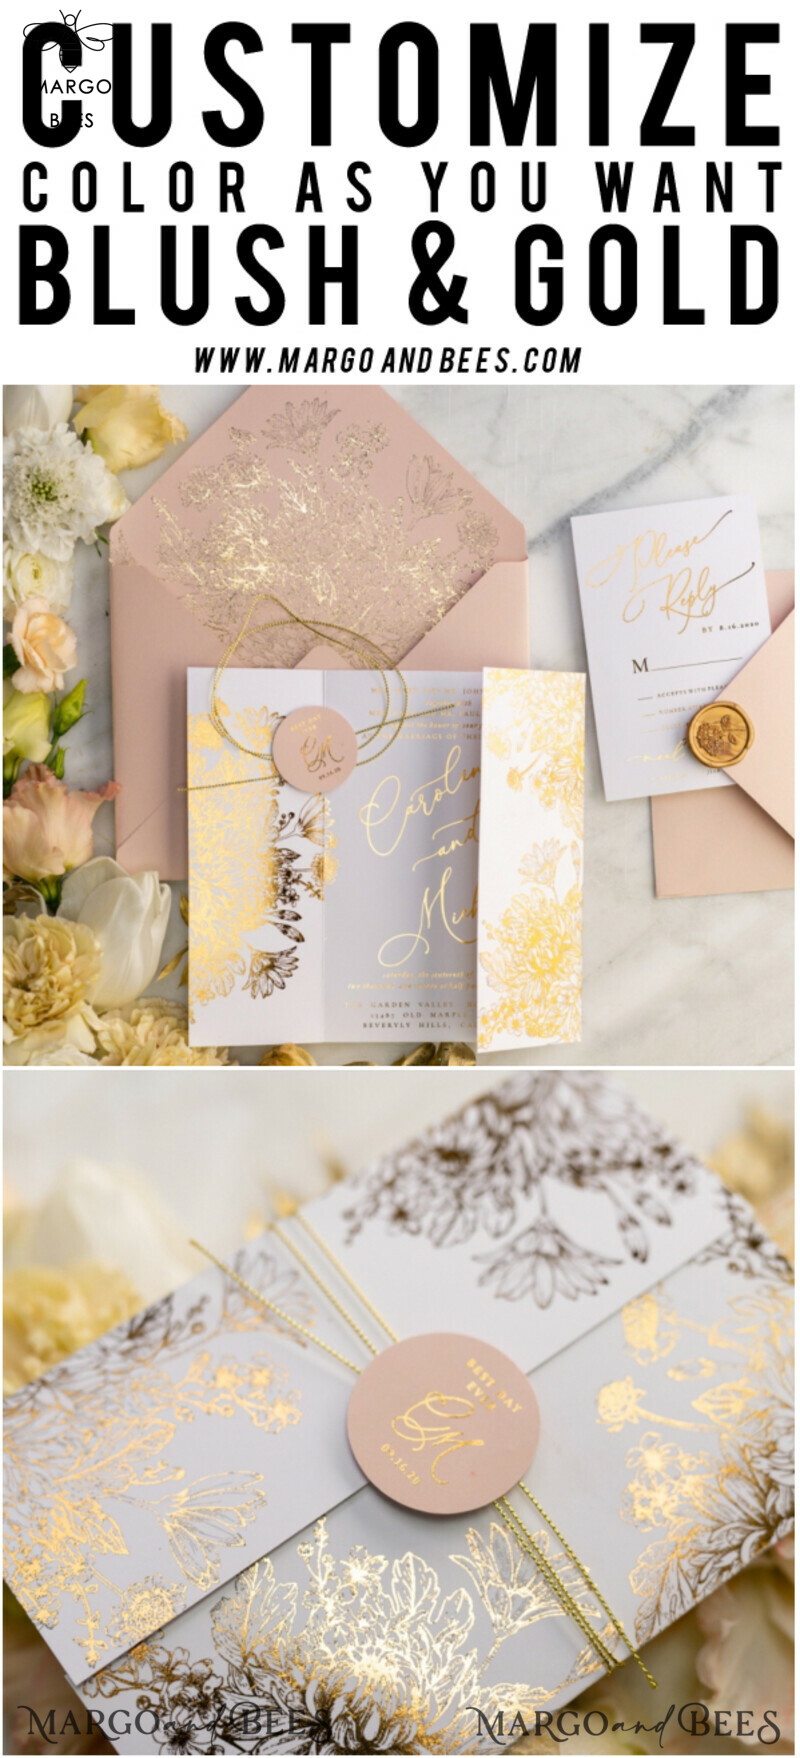 Exquisite Arabic Golden Wedding Invitations with Glamour Gold Foil for a Romantic Blush Pink Affair: Bespoke Indian Wedding Stationery-38